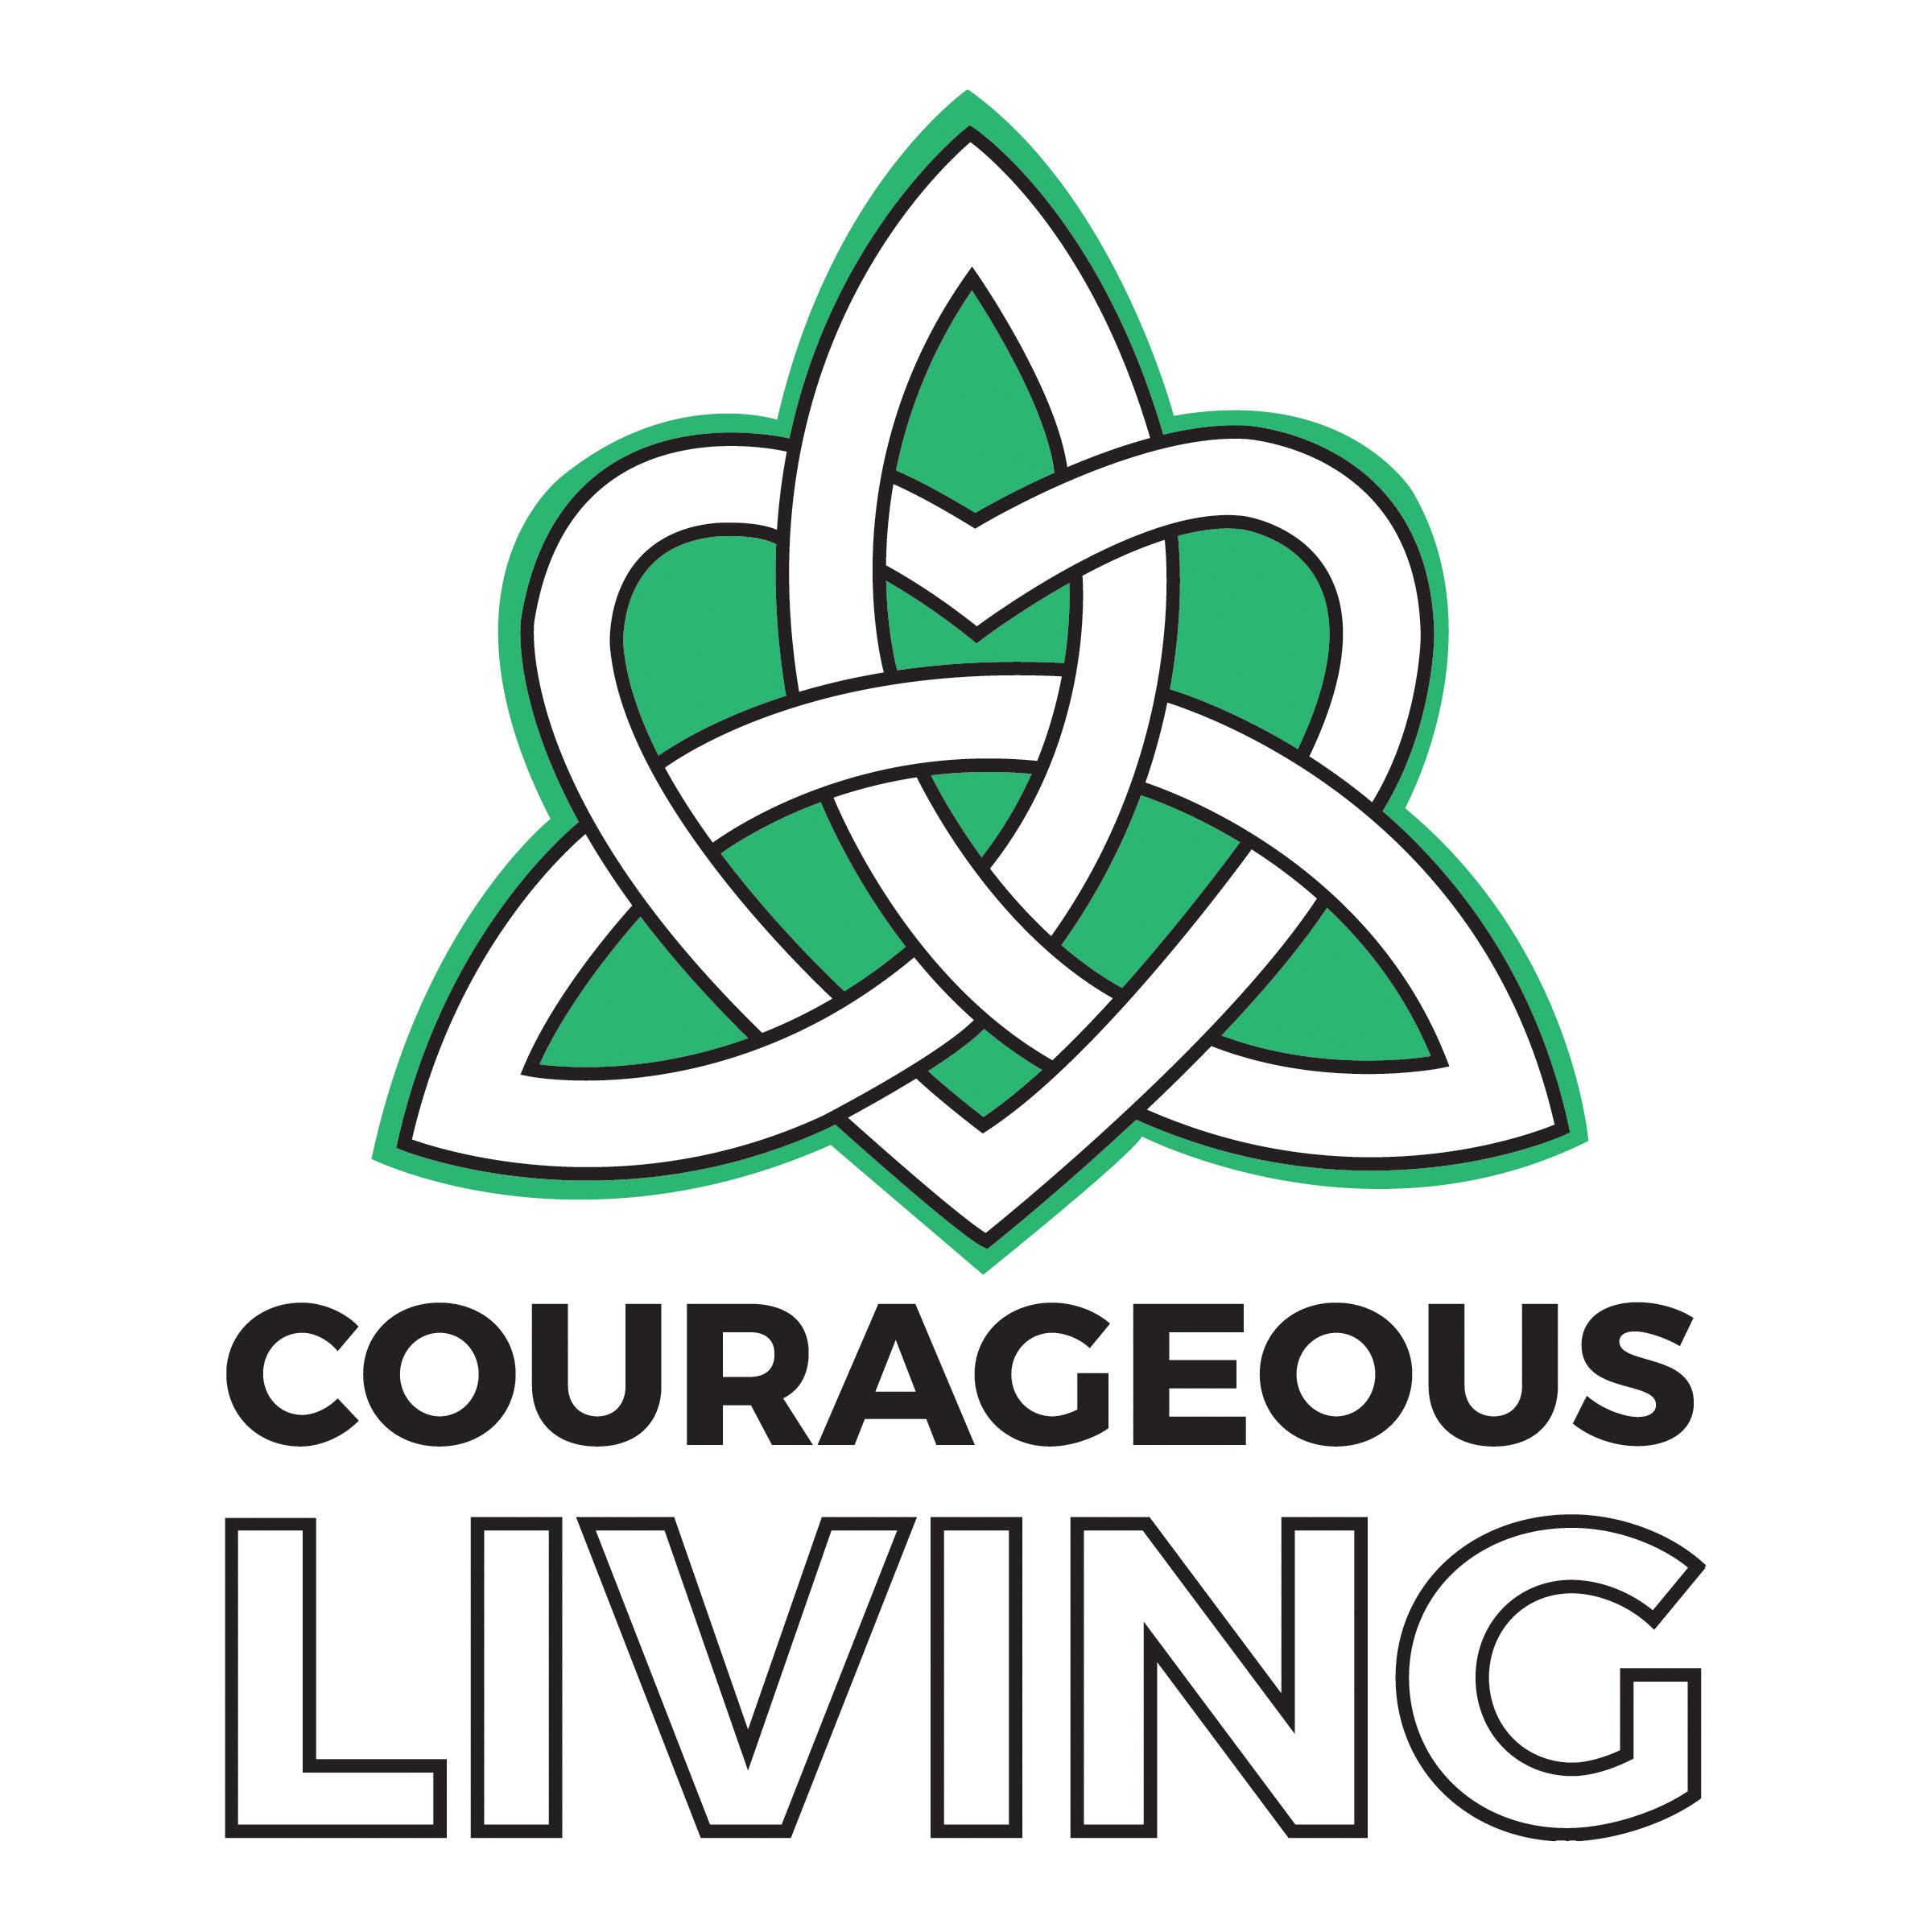 COURAGEOUS LIVING